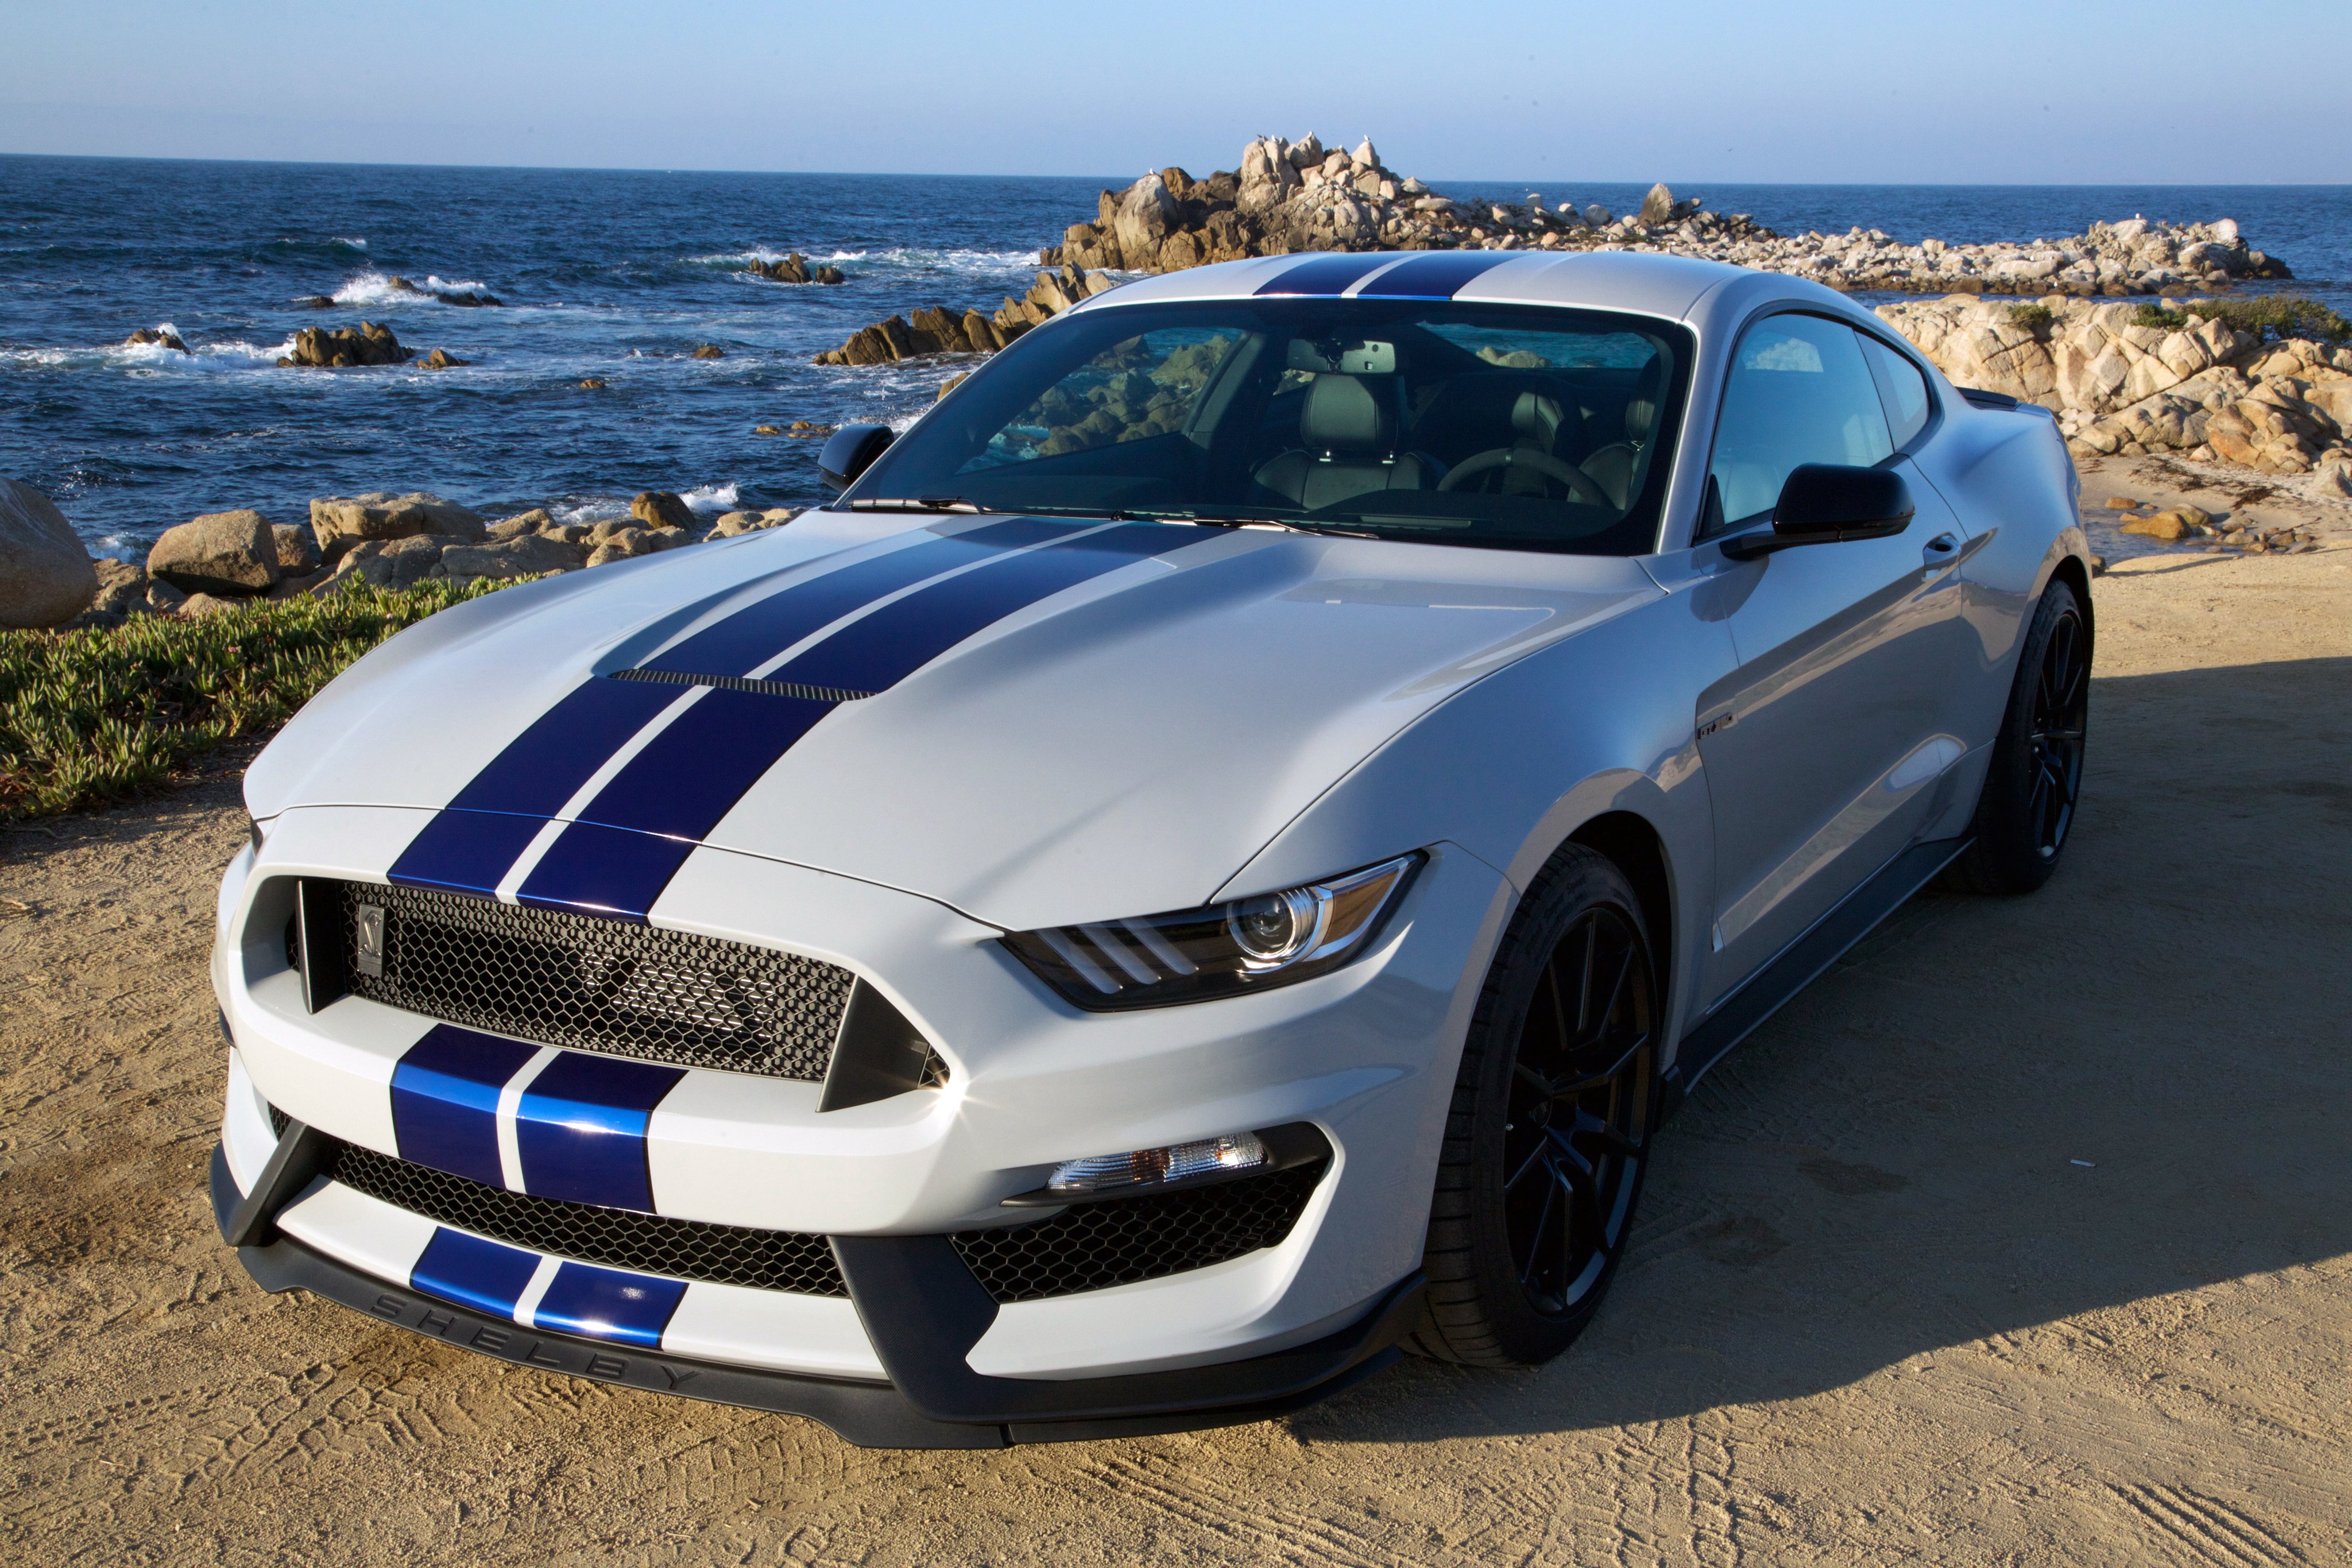 2016, Shelby, Gt350, Mustang, Ford, Muscle Wallpaper